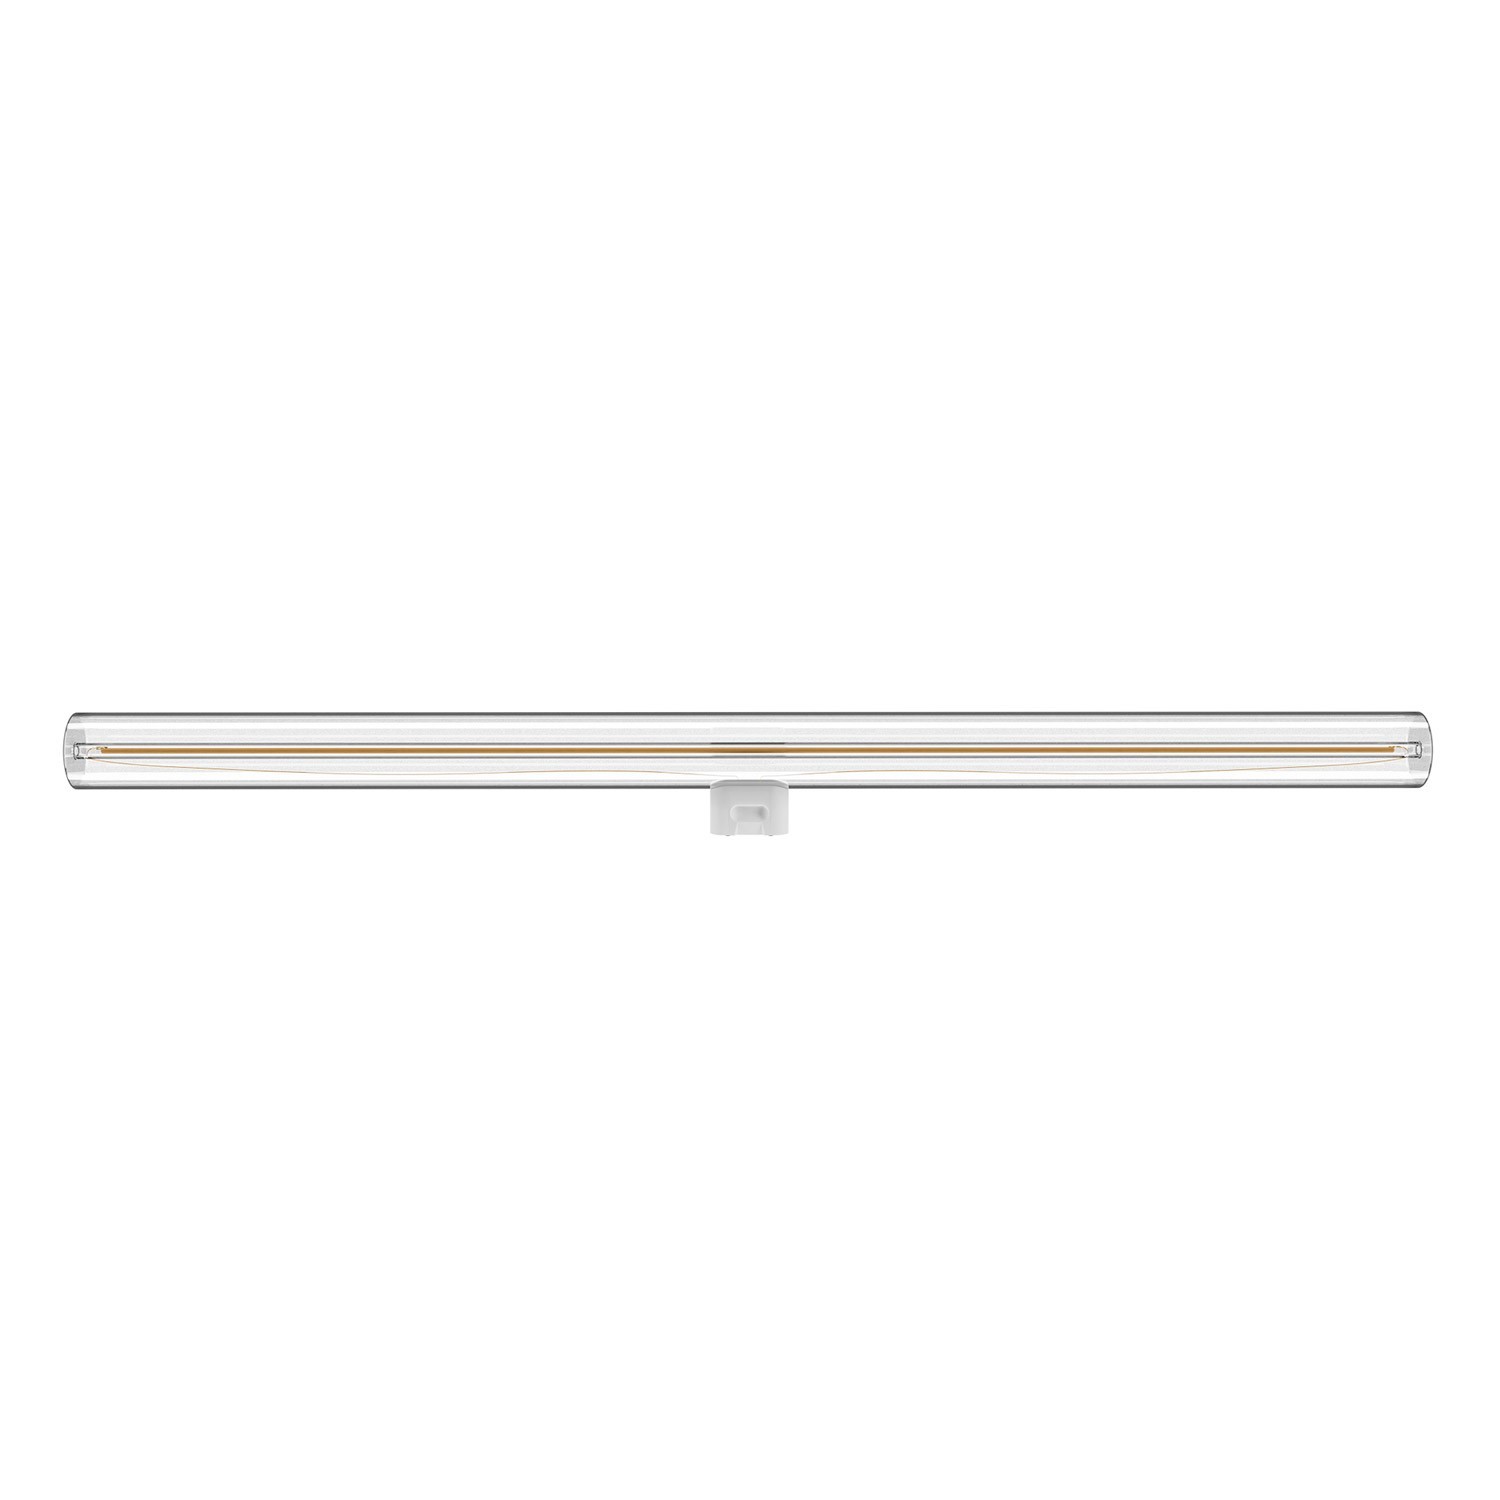 Fermaluce Esse14, metal wall lamp with bent extension